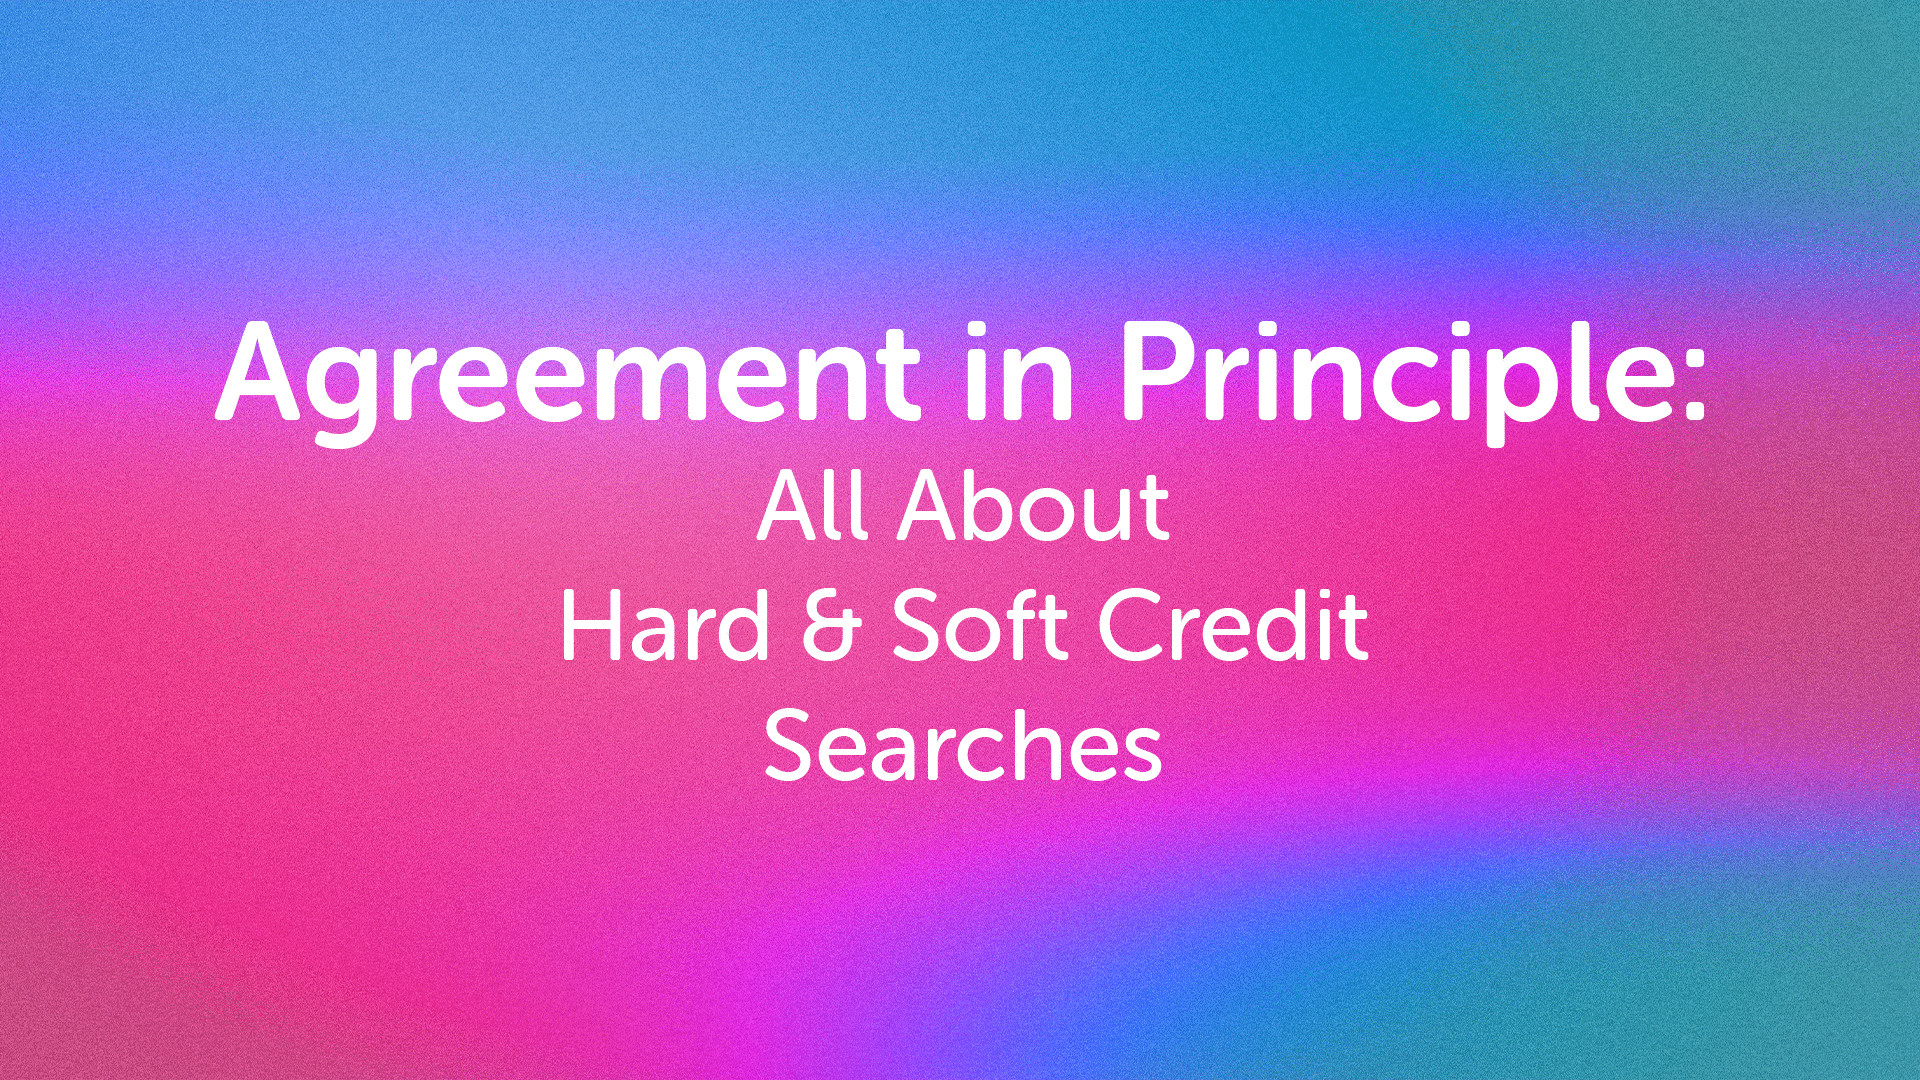 Agreement in Principle: All About Hard & Soft Credit Searches in Derby